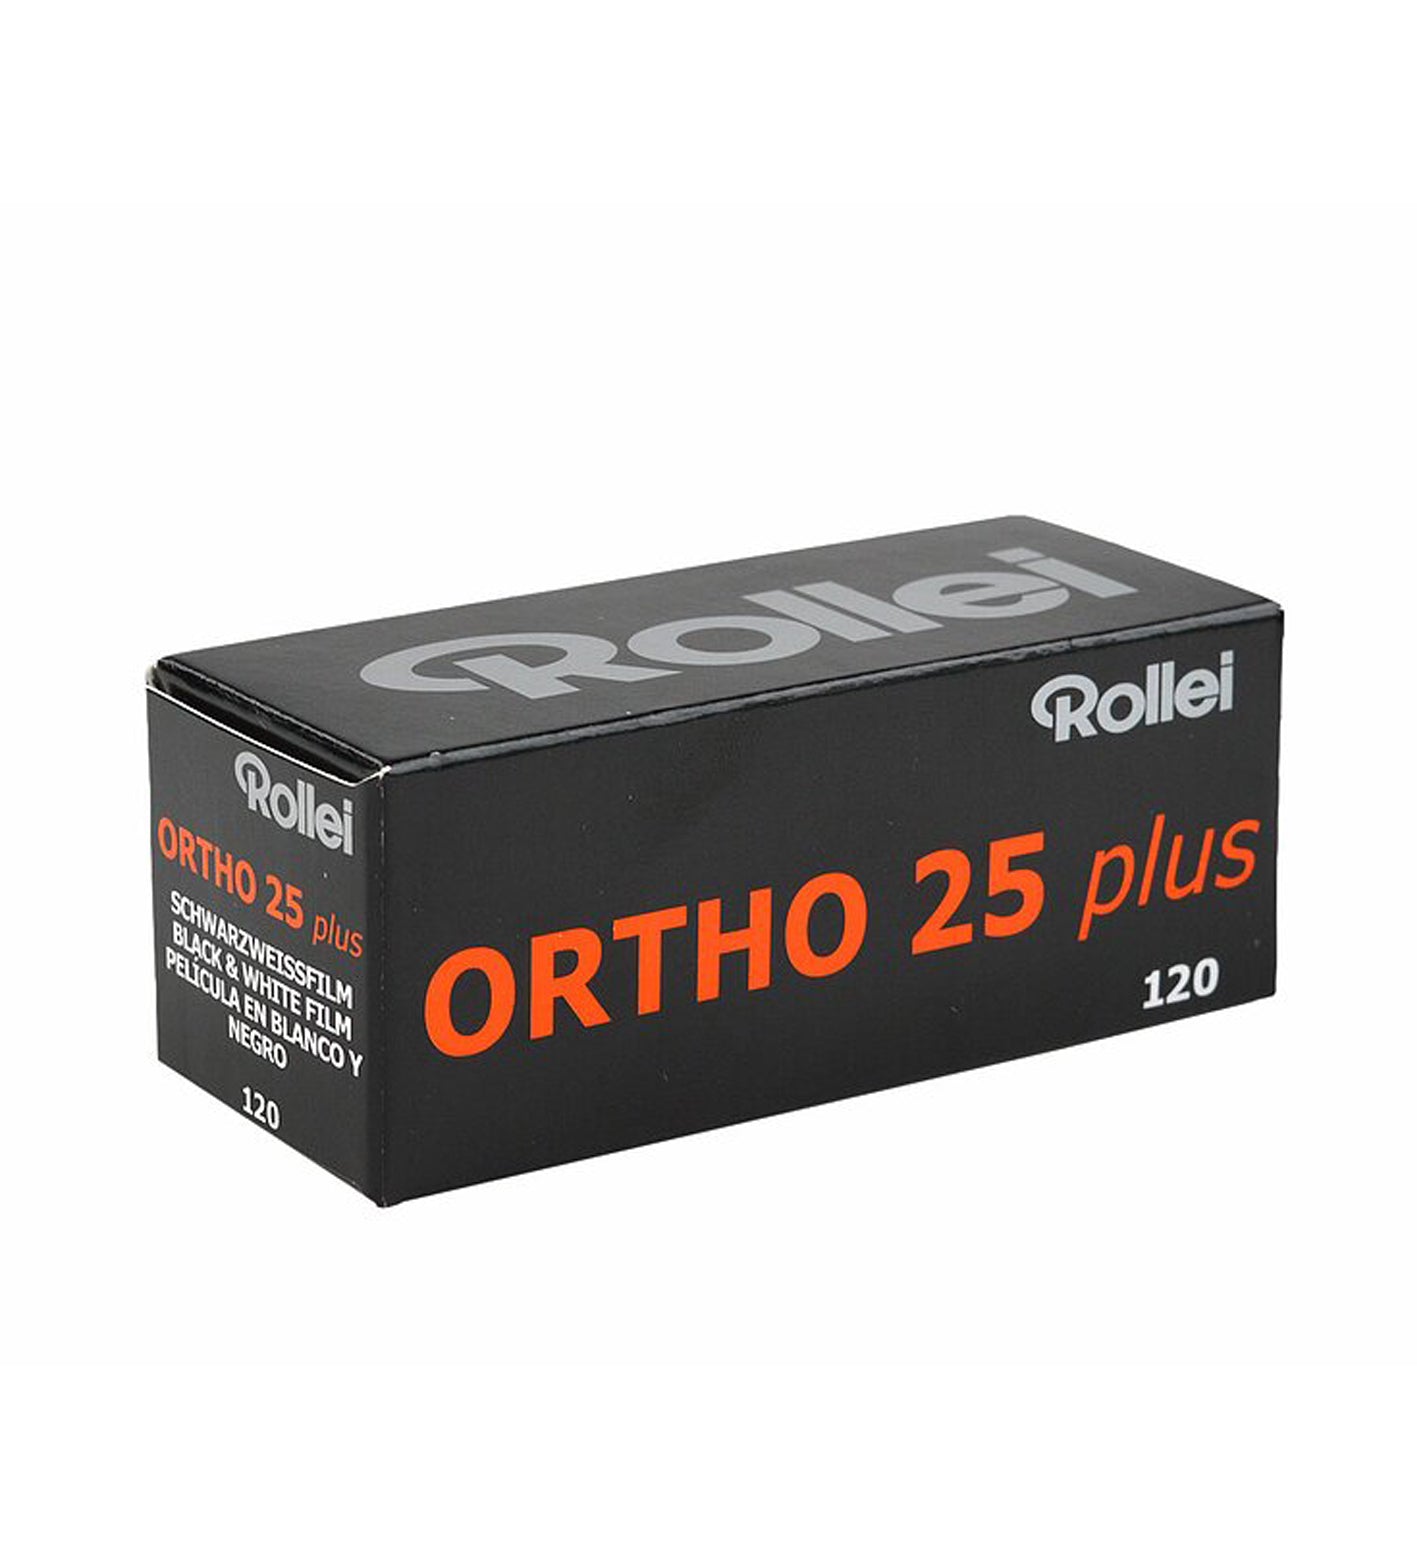 Rollei Ortho 25 120 Film (£10.99 incl VAT)